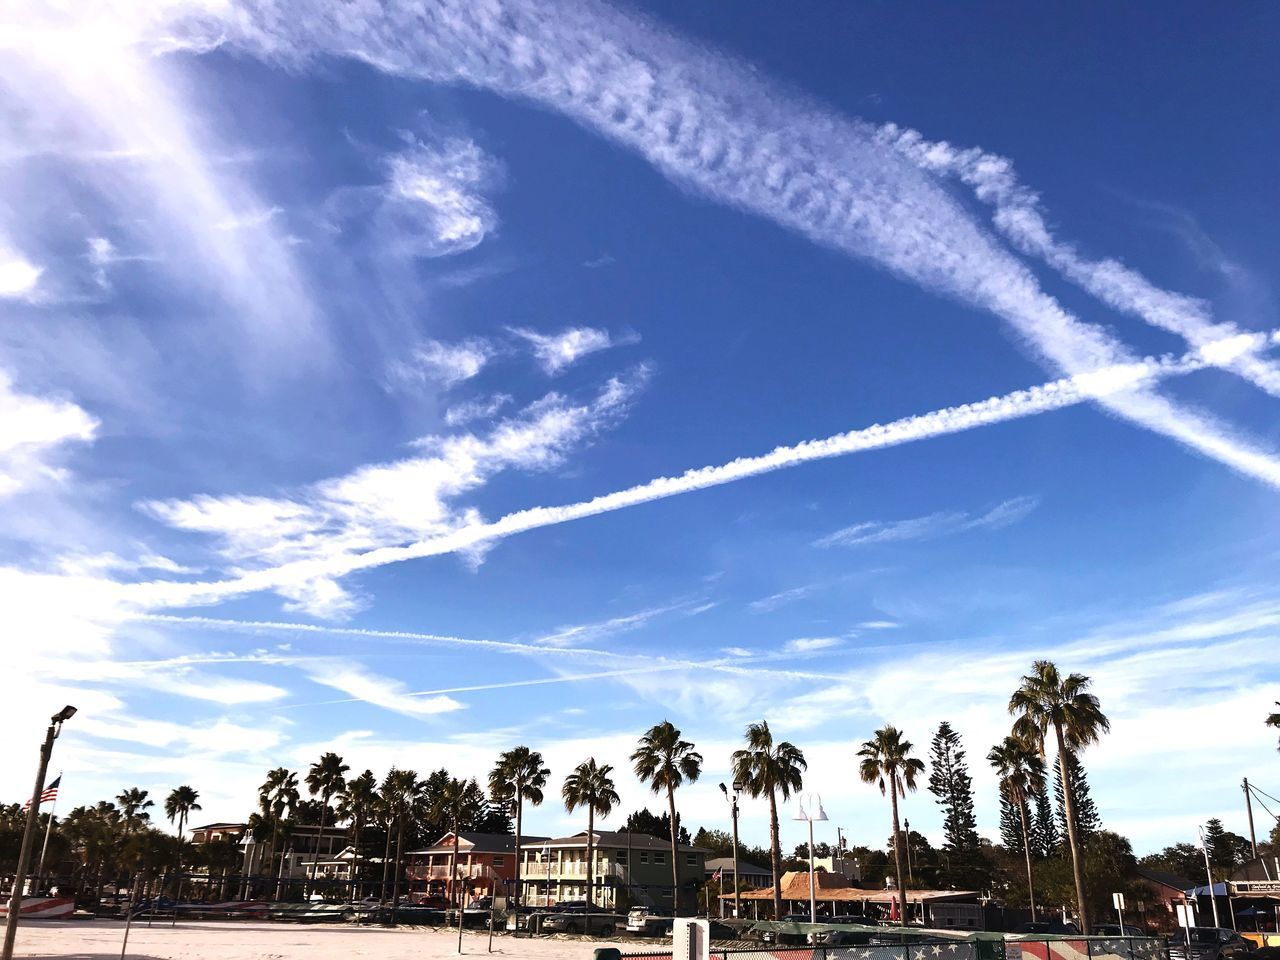 LOW ANGLE VIEW OF PALM TREES AND VAPOR TRAIL IN SKY